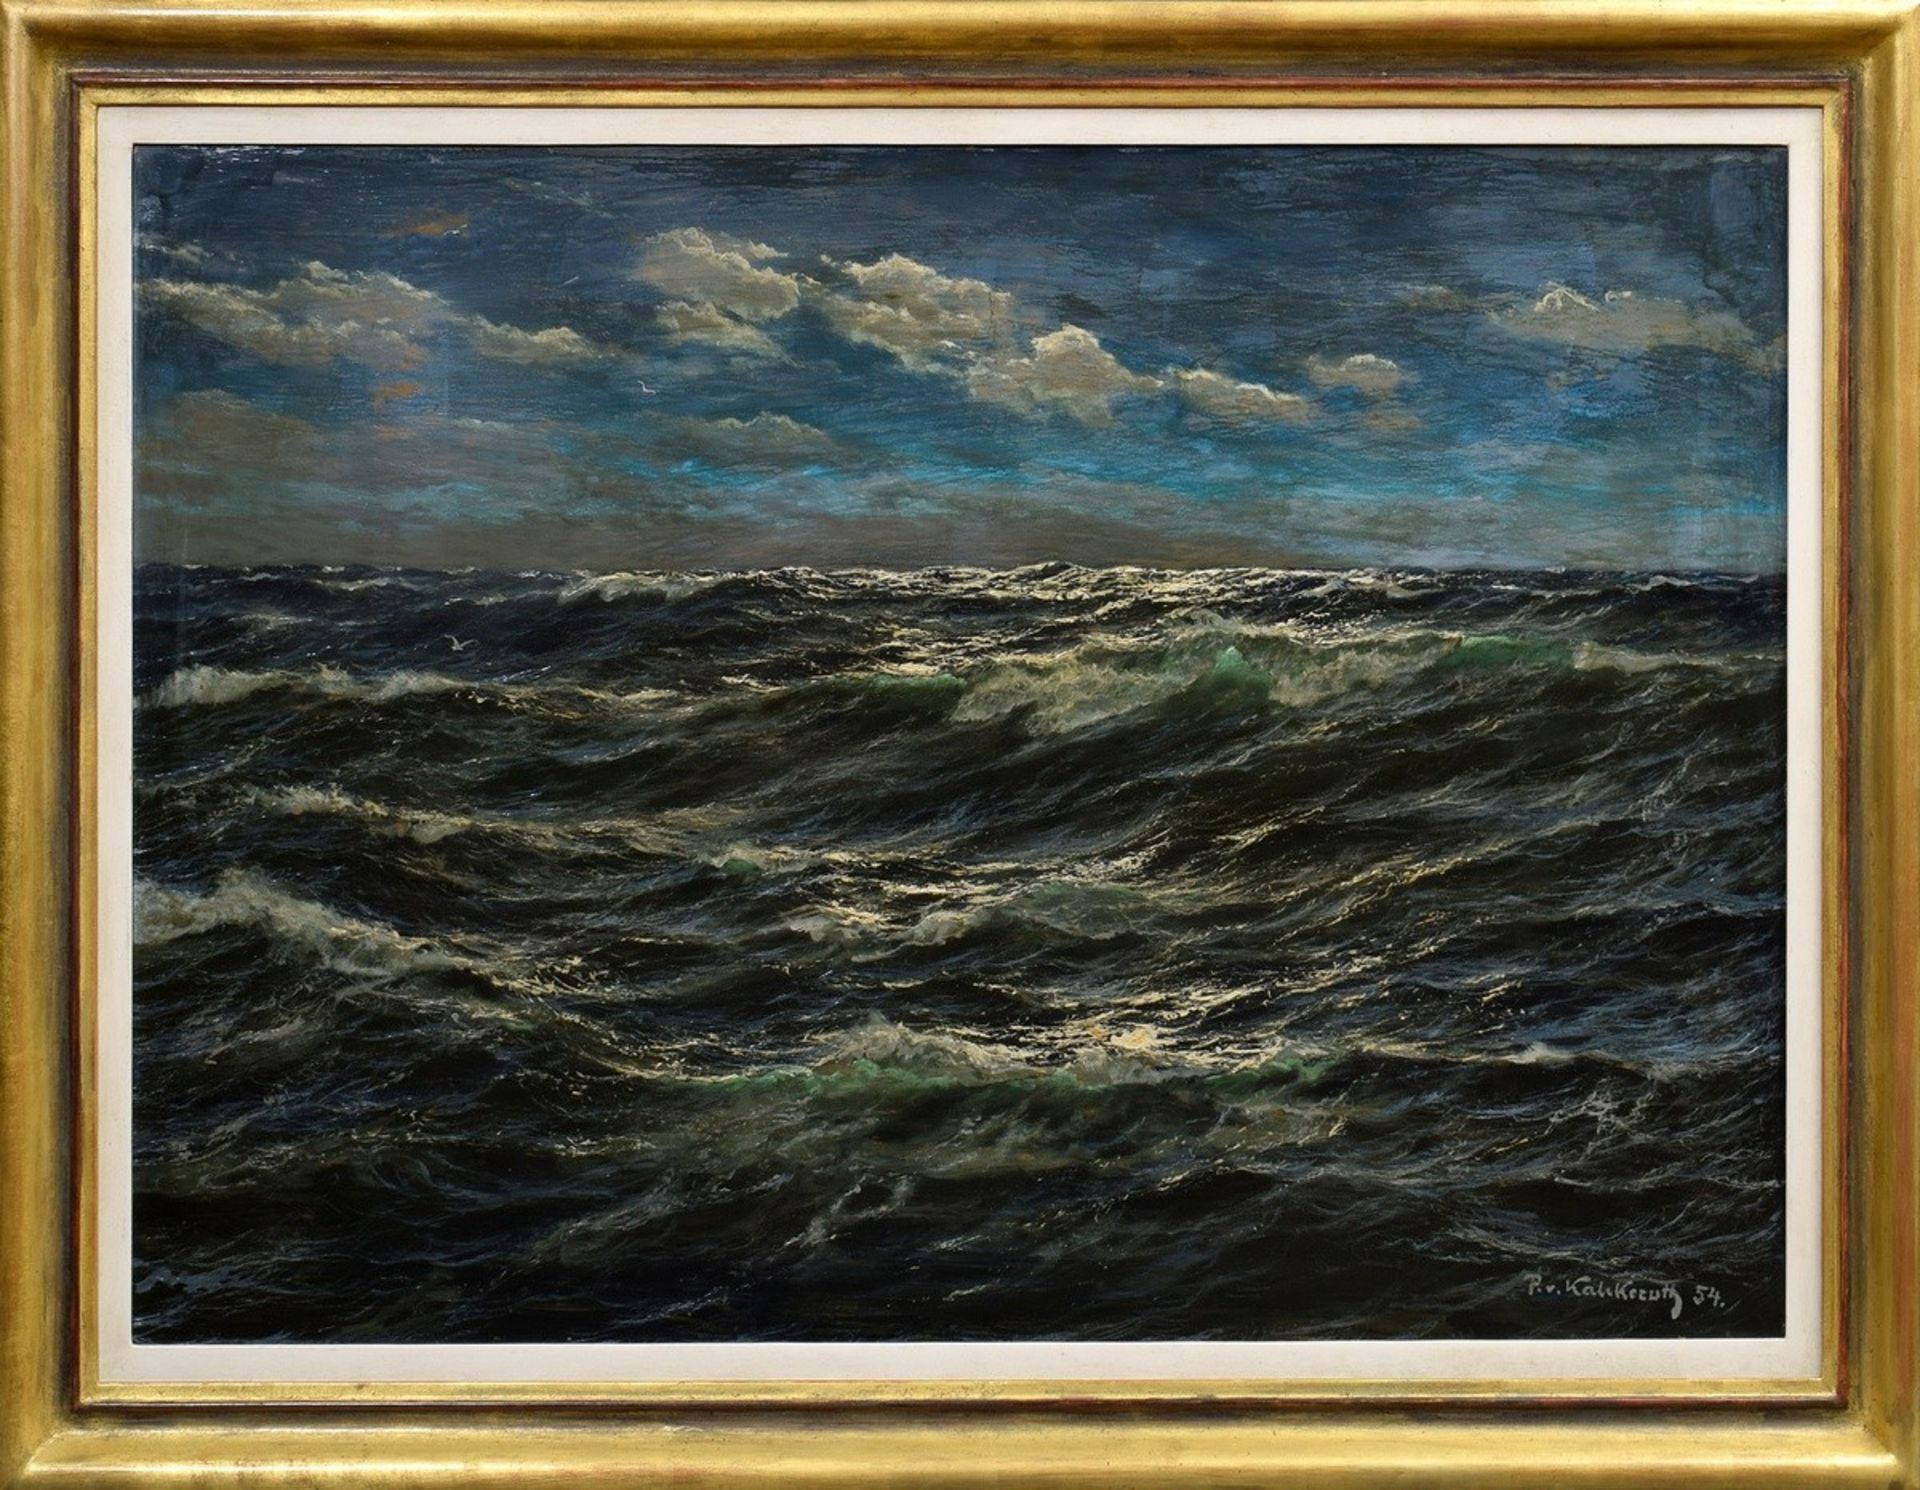 Kalckreuth, Patrick v. (1892-1970) "Troubled Sea with Seagulls" 1954, oil/plate, b.r. sign./dat., 6 - Image 2 of 6